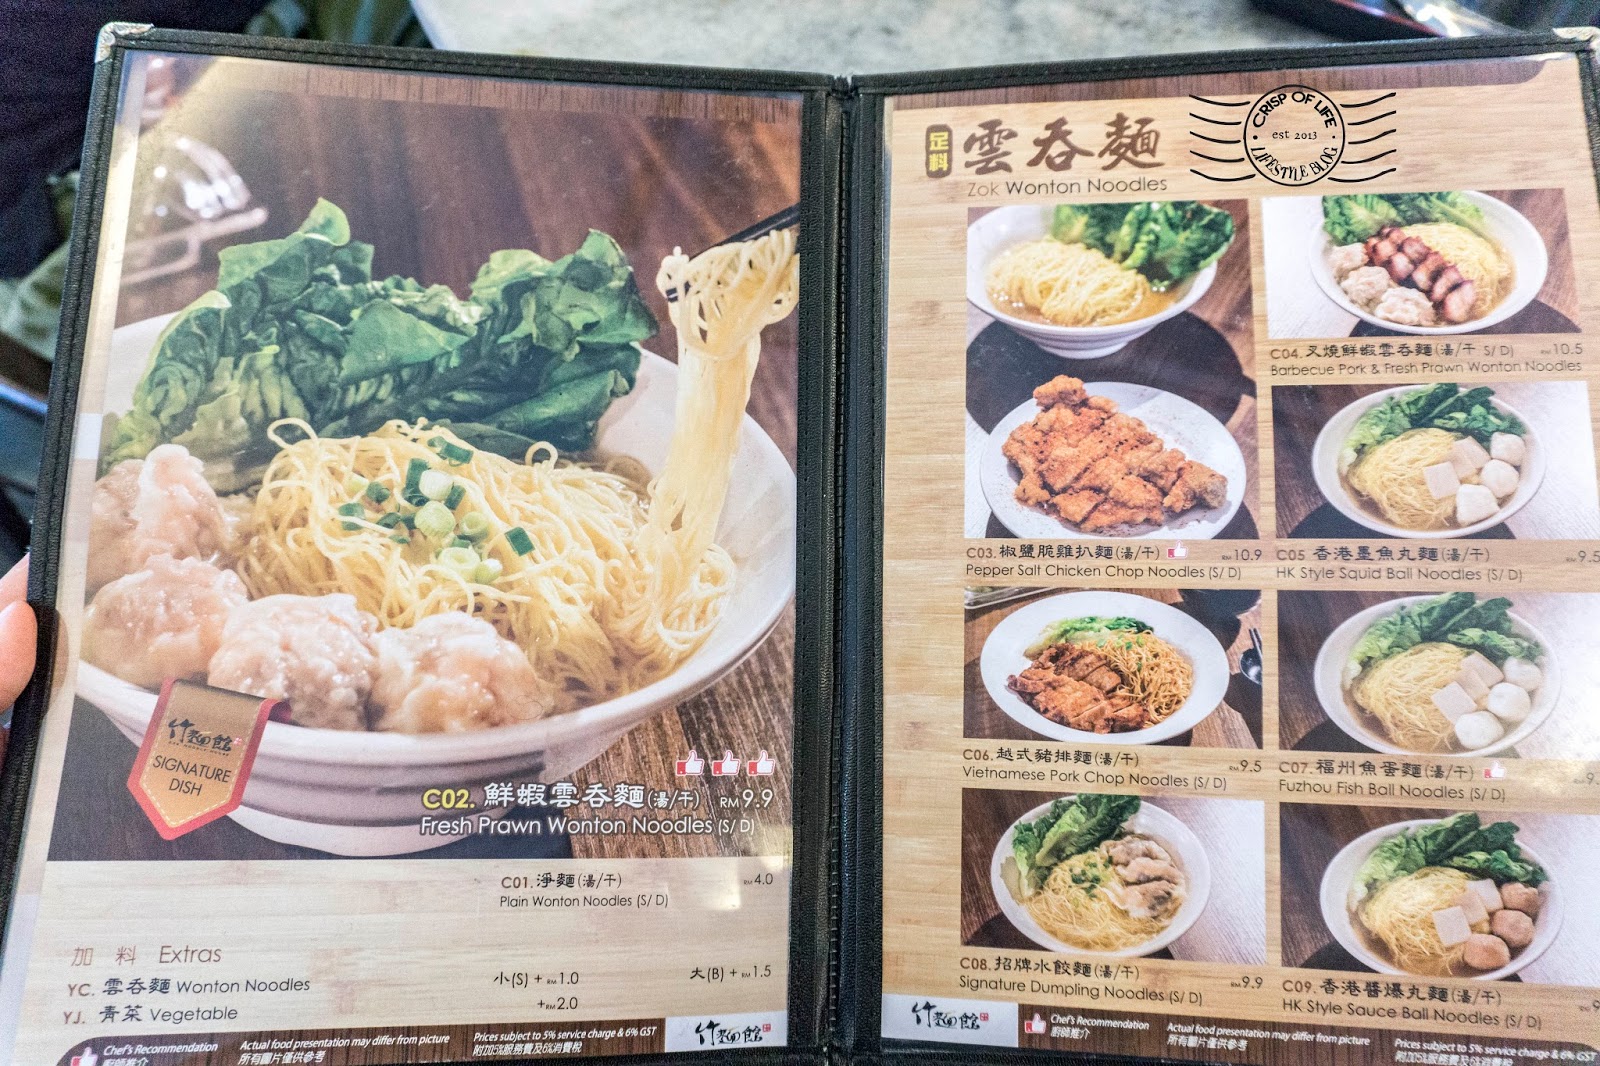 Dim sum and noodle eatery in Setia Alam, Selangor Zok Noodle House